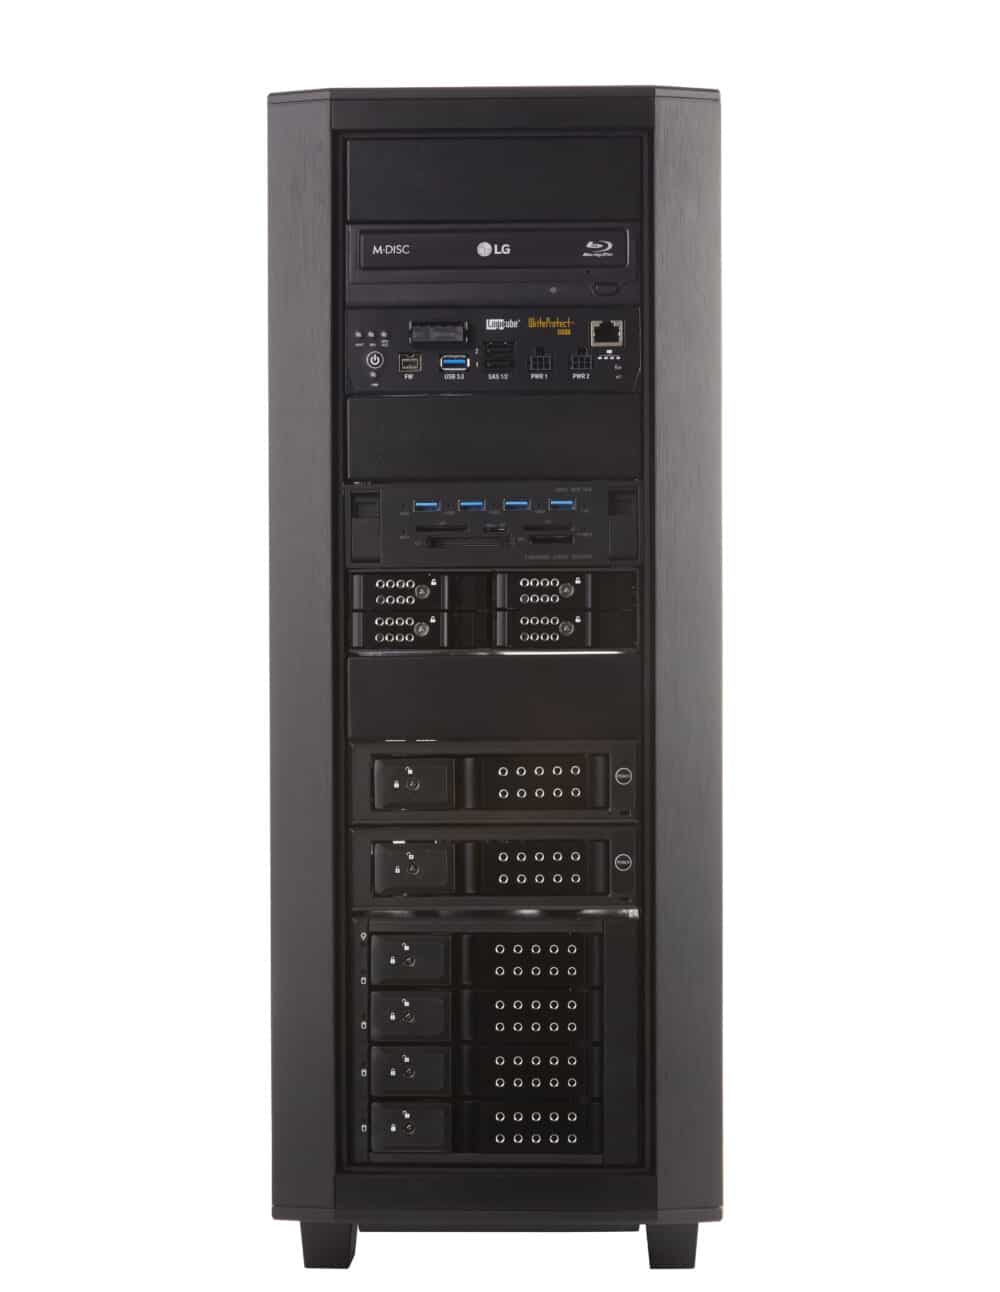 A black computer tower with a number of drives on it.